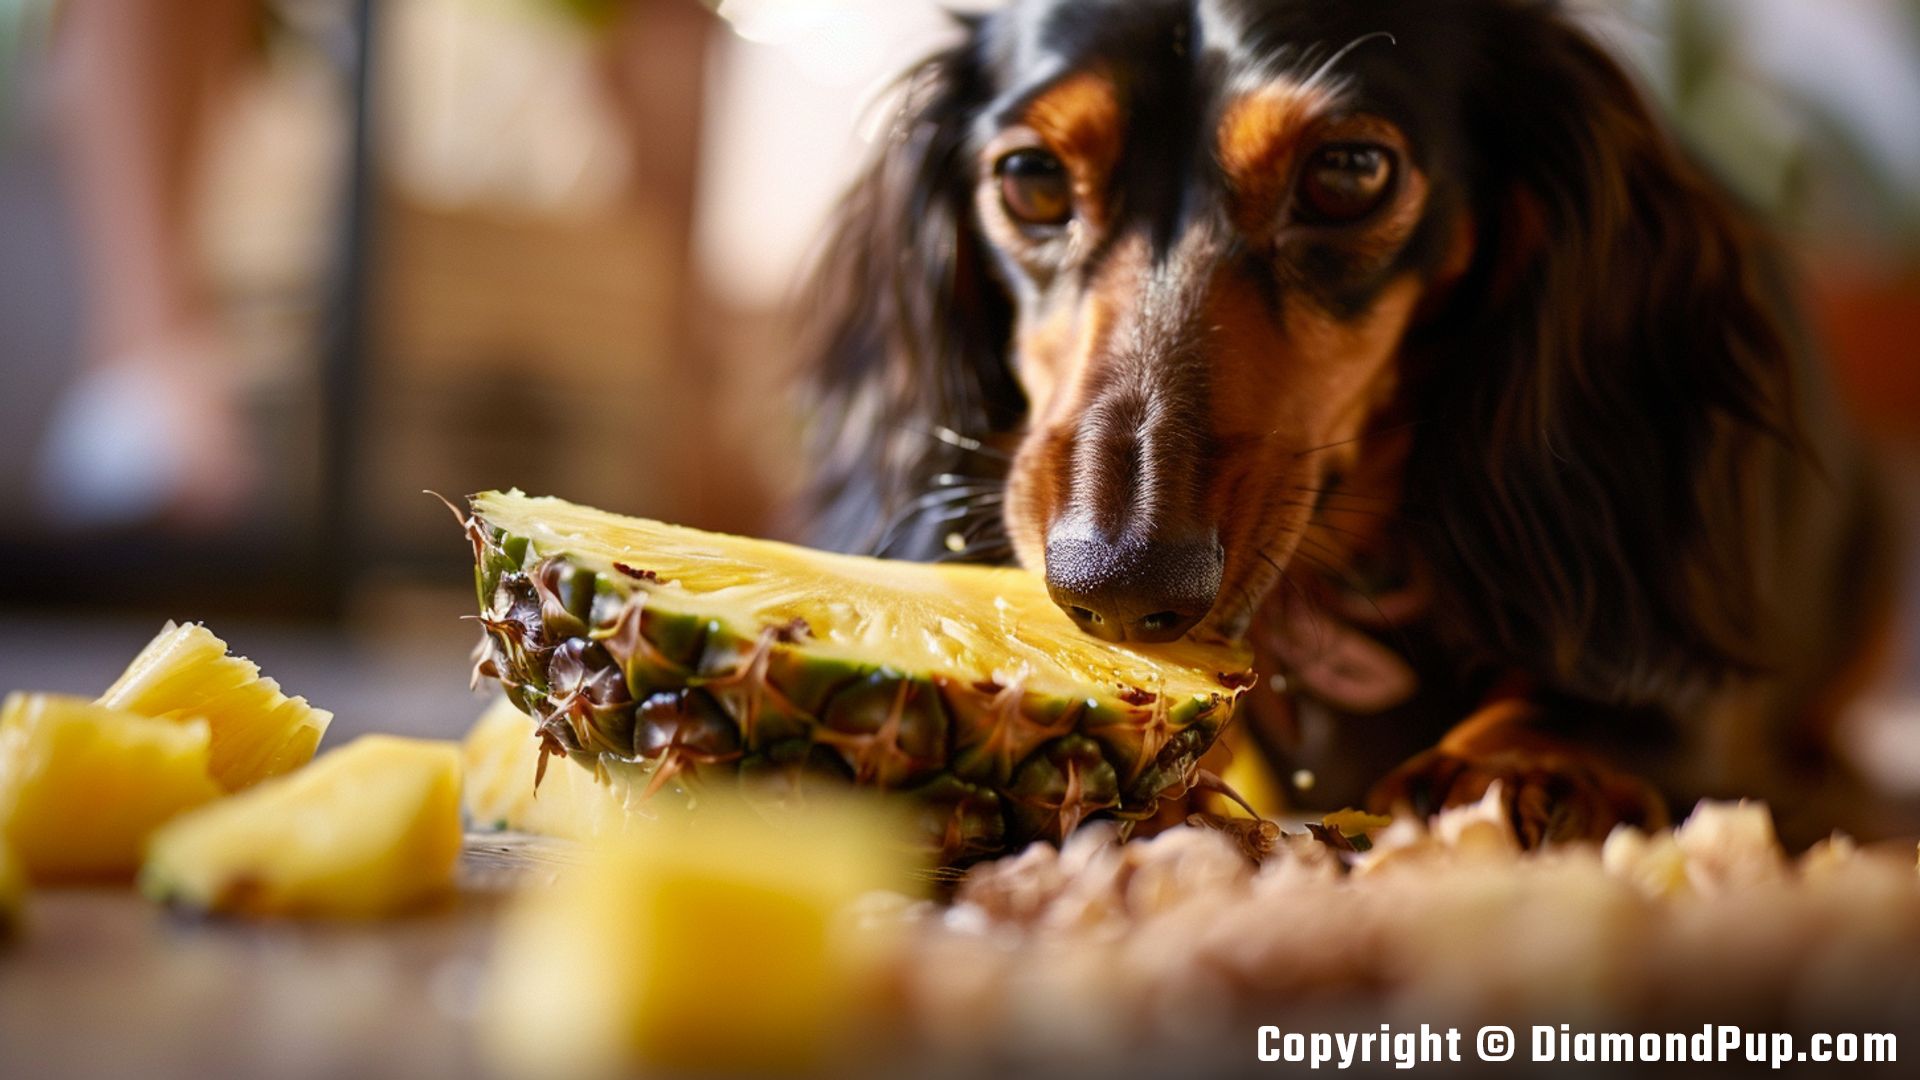 Photograph of a Playful Dachshund Snacking on Pineapple